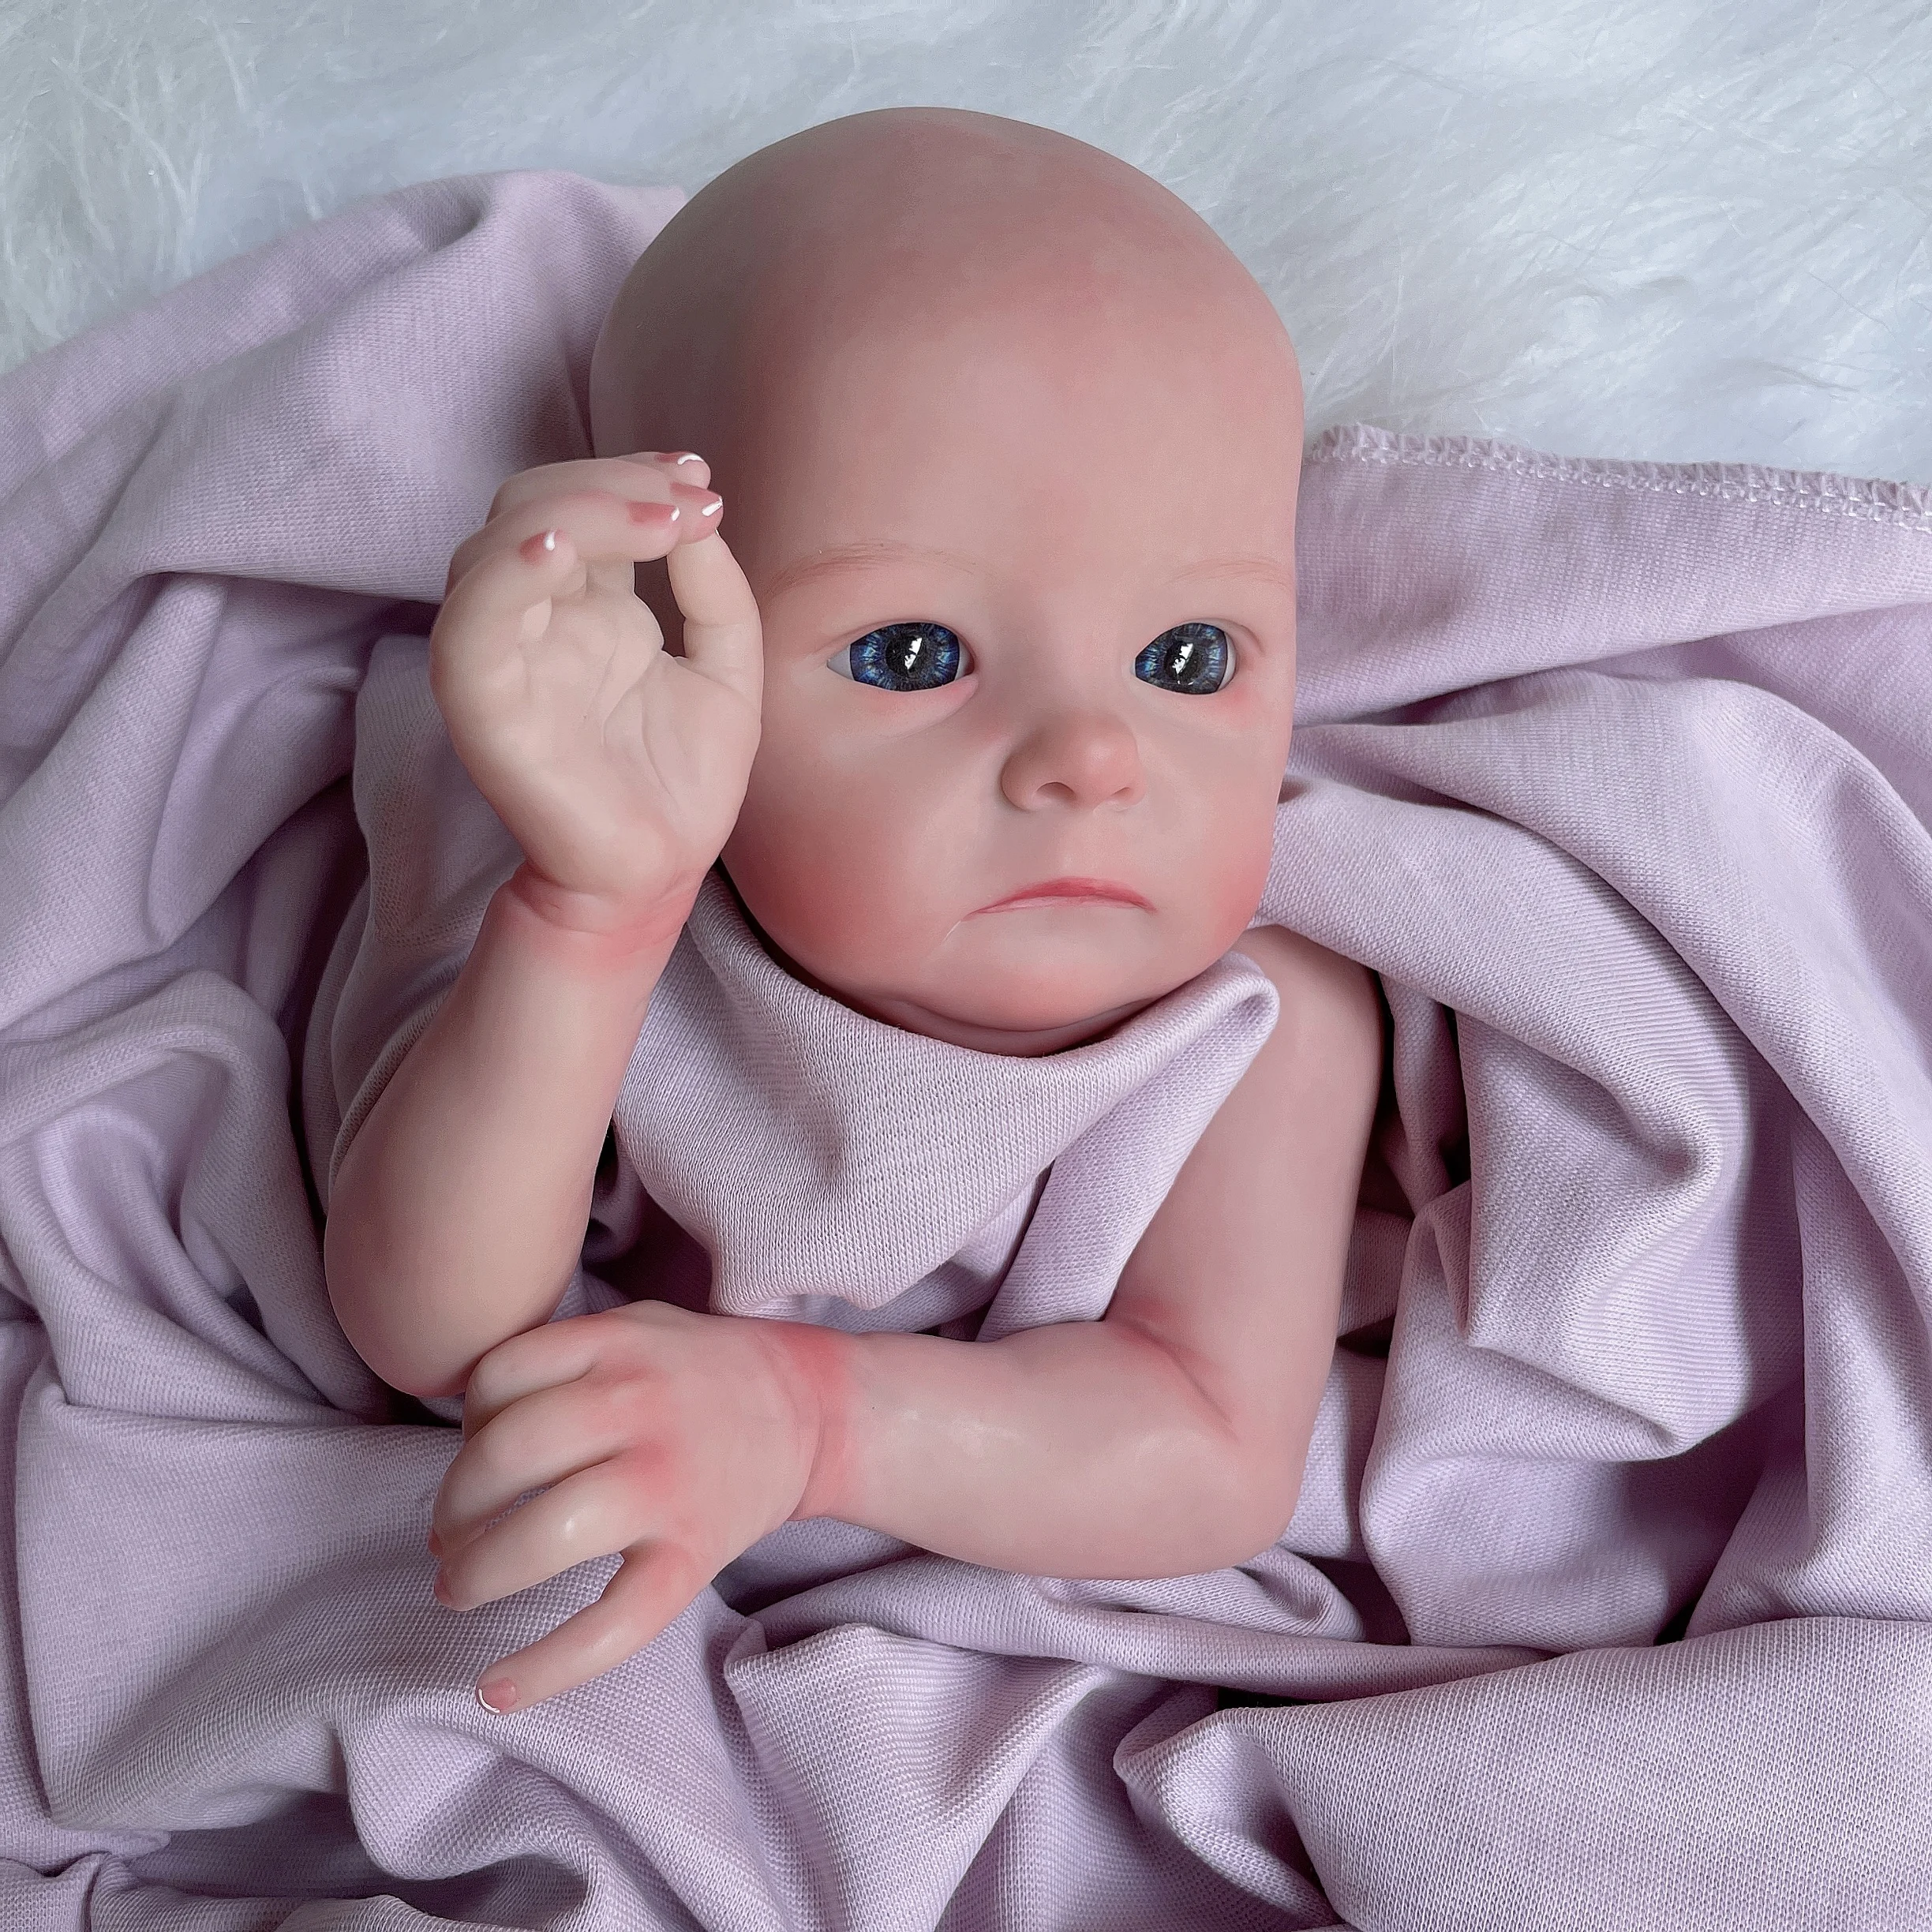 Painted Reborn Baby Kit Tink Unassembled 16 Inches Newborn Size No Hair Baby Kit DIY Toy Figure Gift For Kids